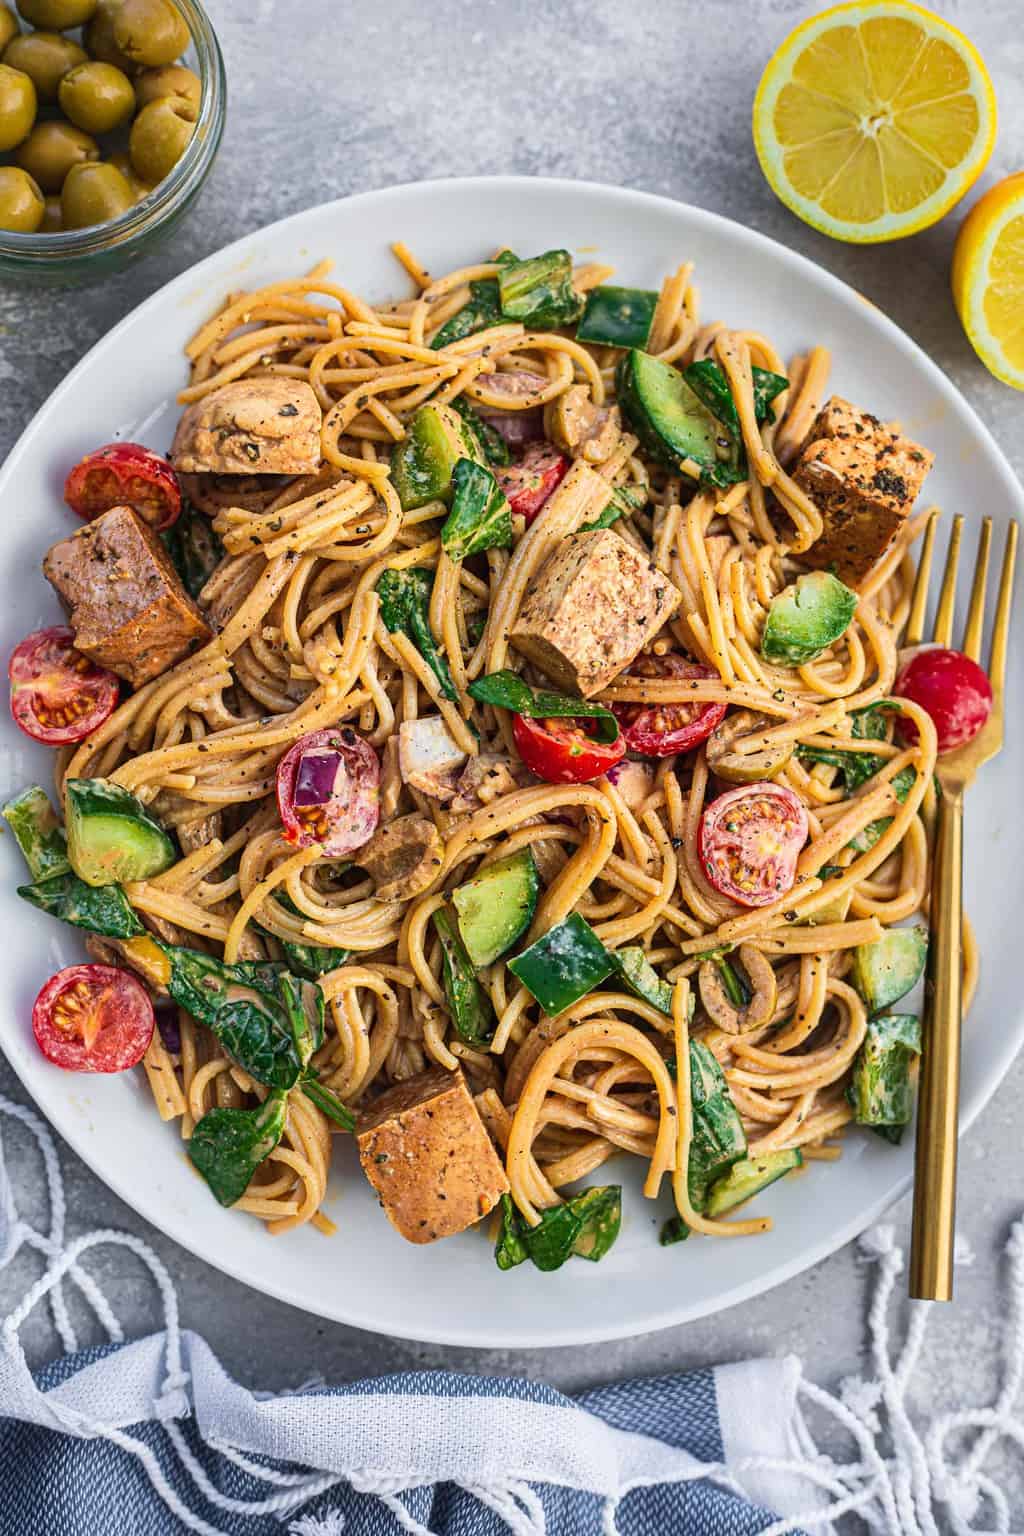 Plate of cold vegan pasta with tofu and vegetables